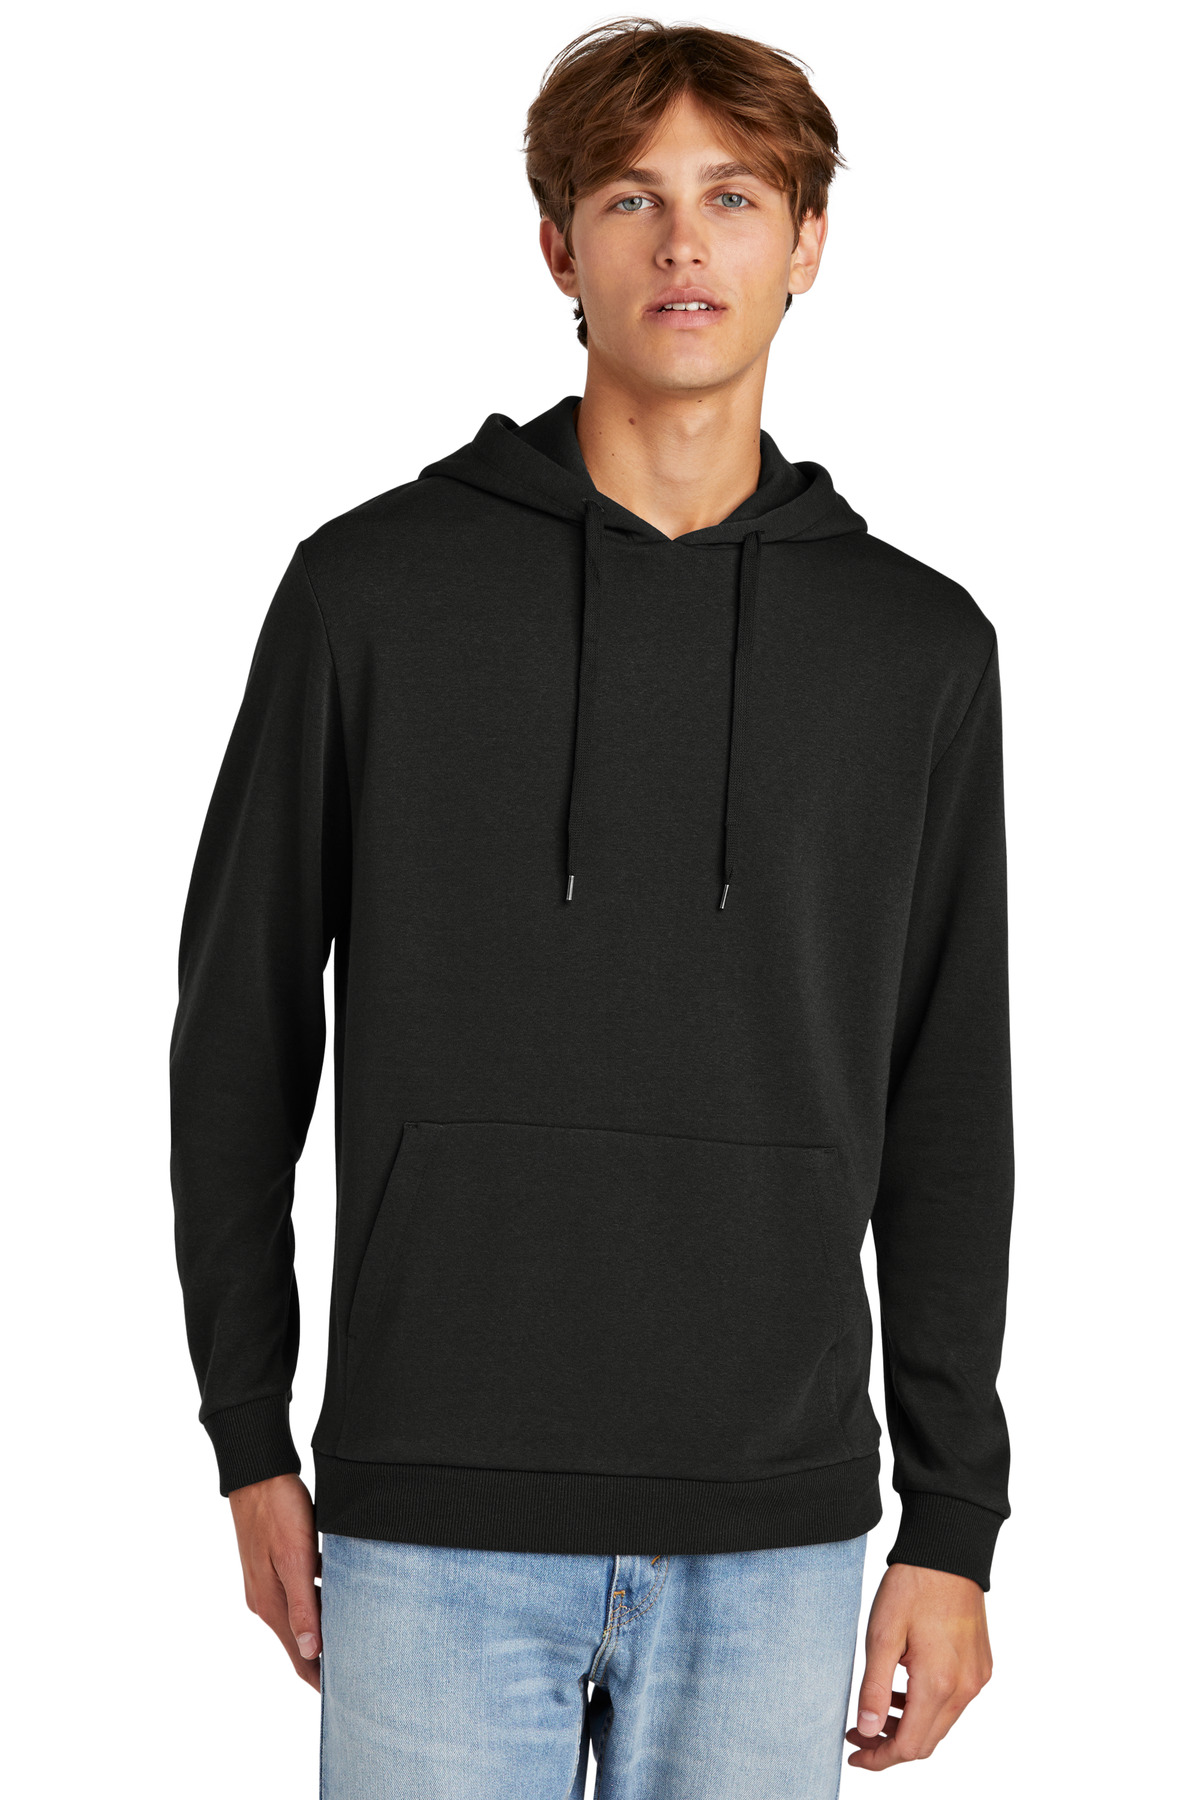 District Perfect Tri Fleece Pullover Hoodie-District